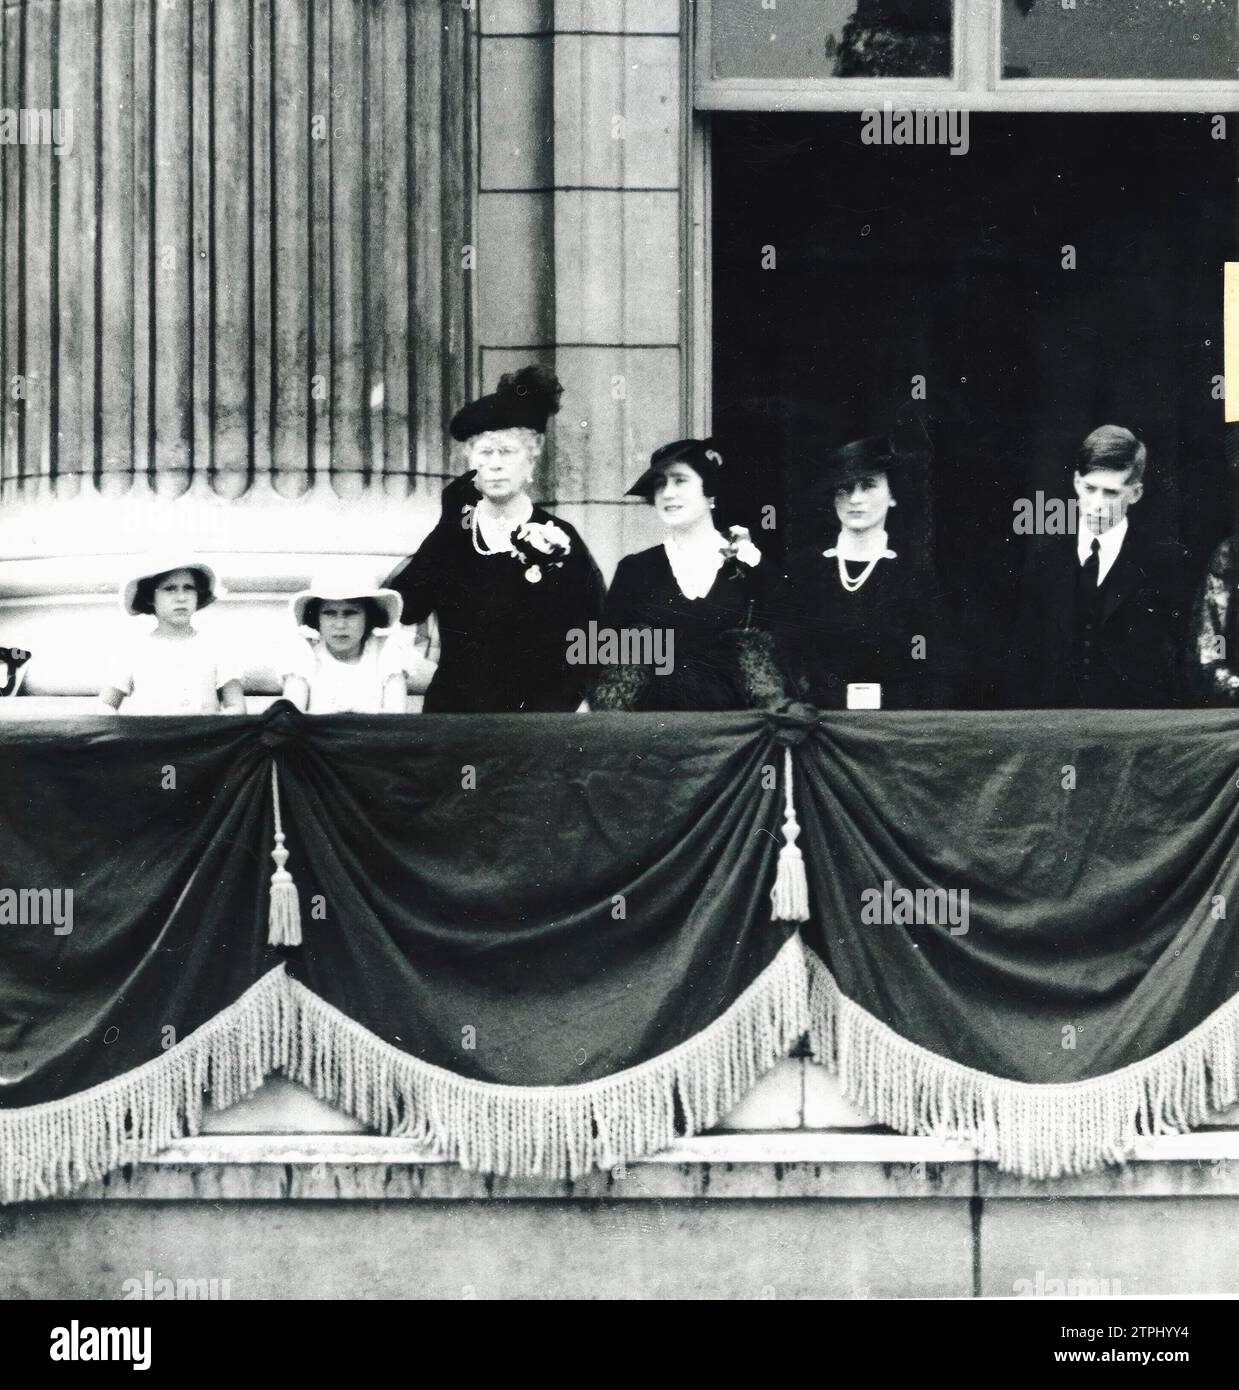 05/31/1936. The military parade held in London on the occasion of the 12th birthday of HM King Edward VIII, was witnessed from the balcony of Buckingham Palace by the Queen Mother, who has Princess Margaret Rose and Elizabeth on her right, and Princess Elizabeth on her left the Duchesses of York and Gloucester, and Viscount Lascelles. Credit: Album / Archivo ABC / Ortiz Stock Photo